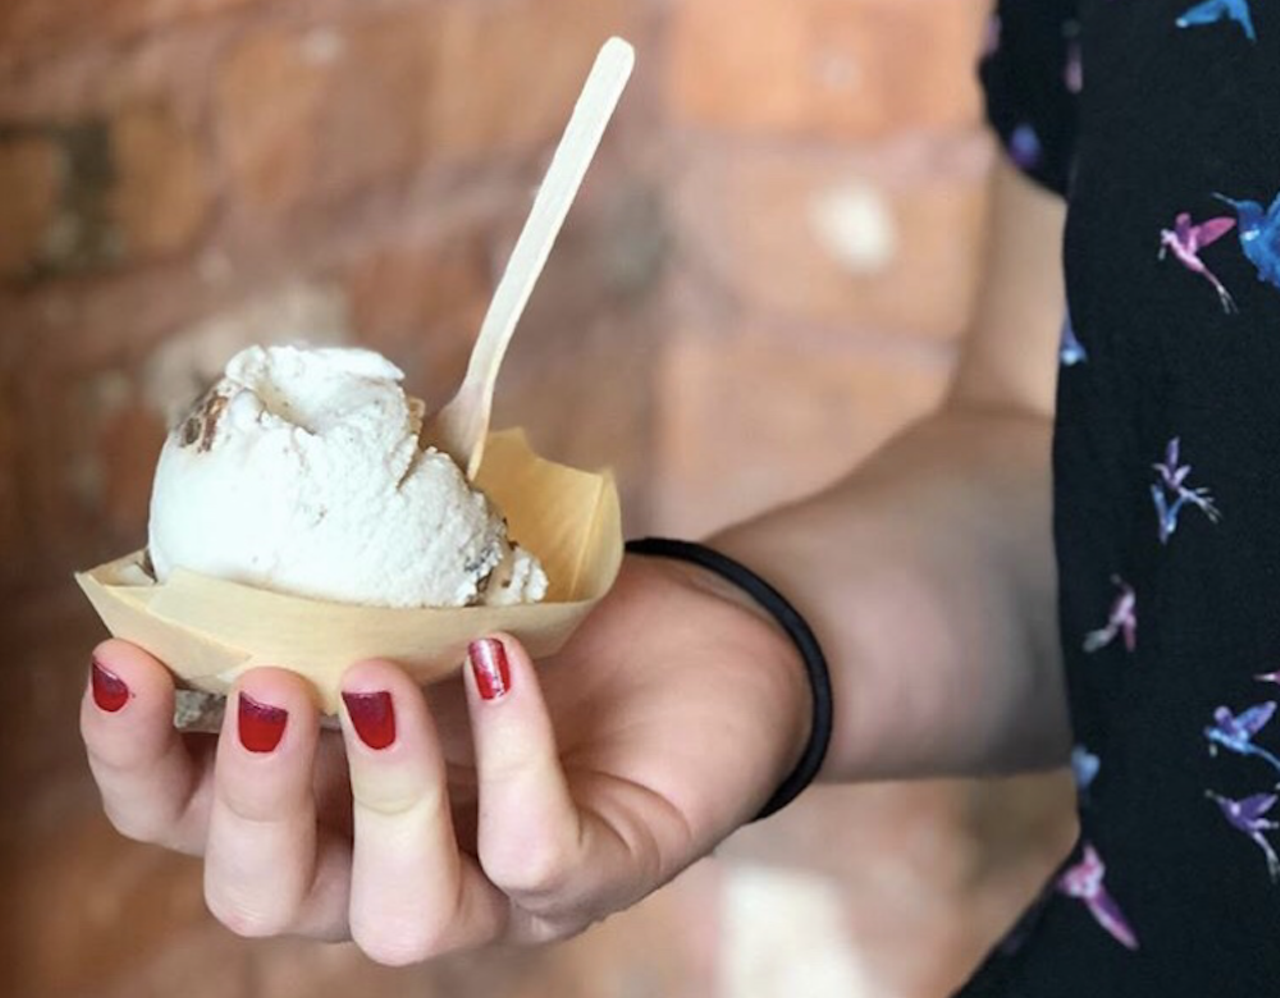 Plant+Love Ice Cream
953 Central Ave., St. Petersburg. 727-900-6744.
Rotating flavors of vegan ice cream, made with an organic coconut milk base, from a community-driven artist collective.
Photo via Celine Duvoisin